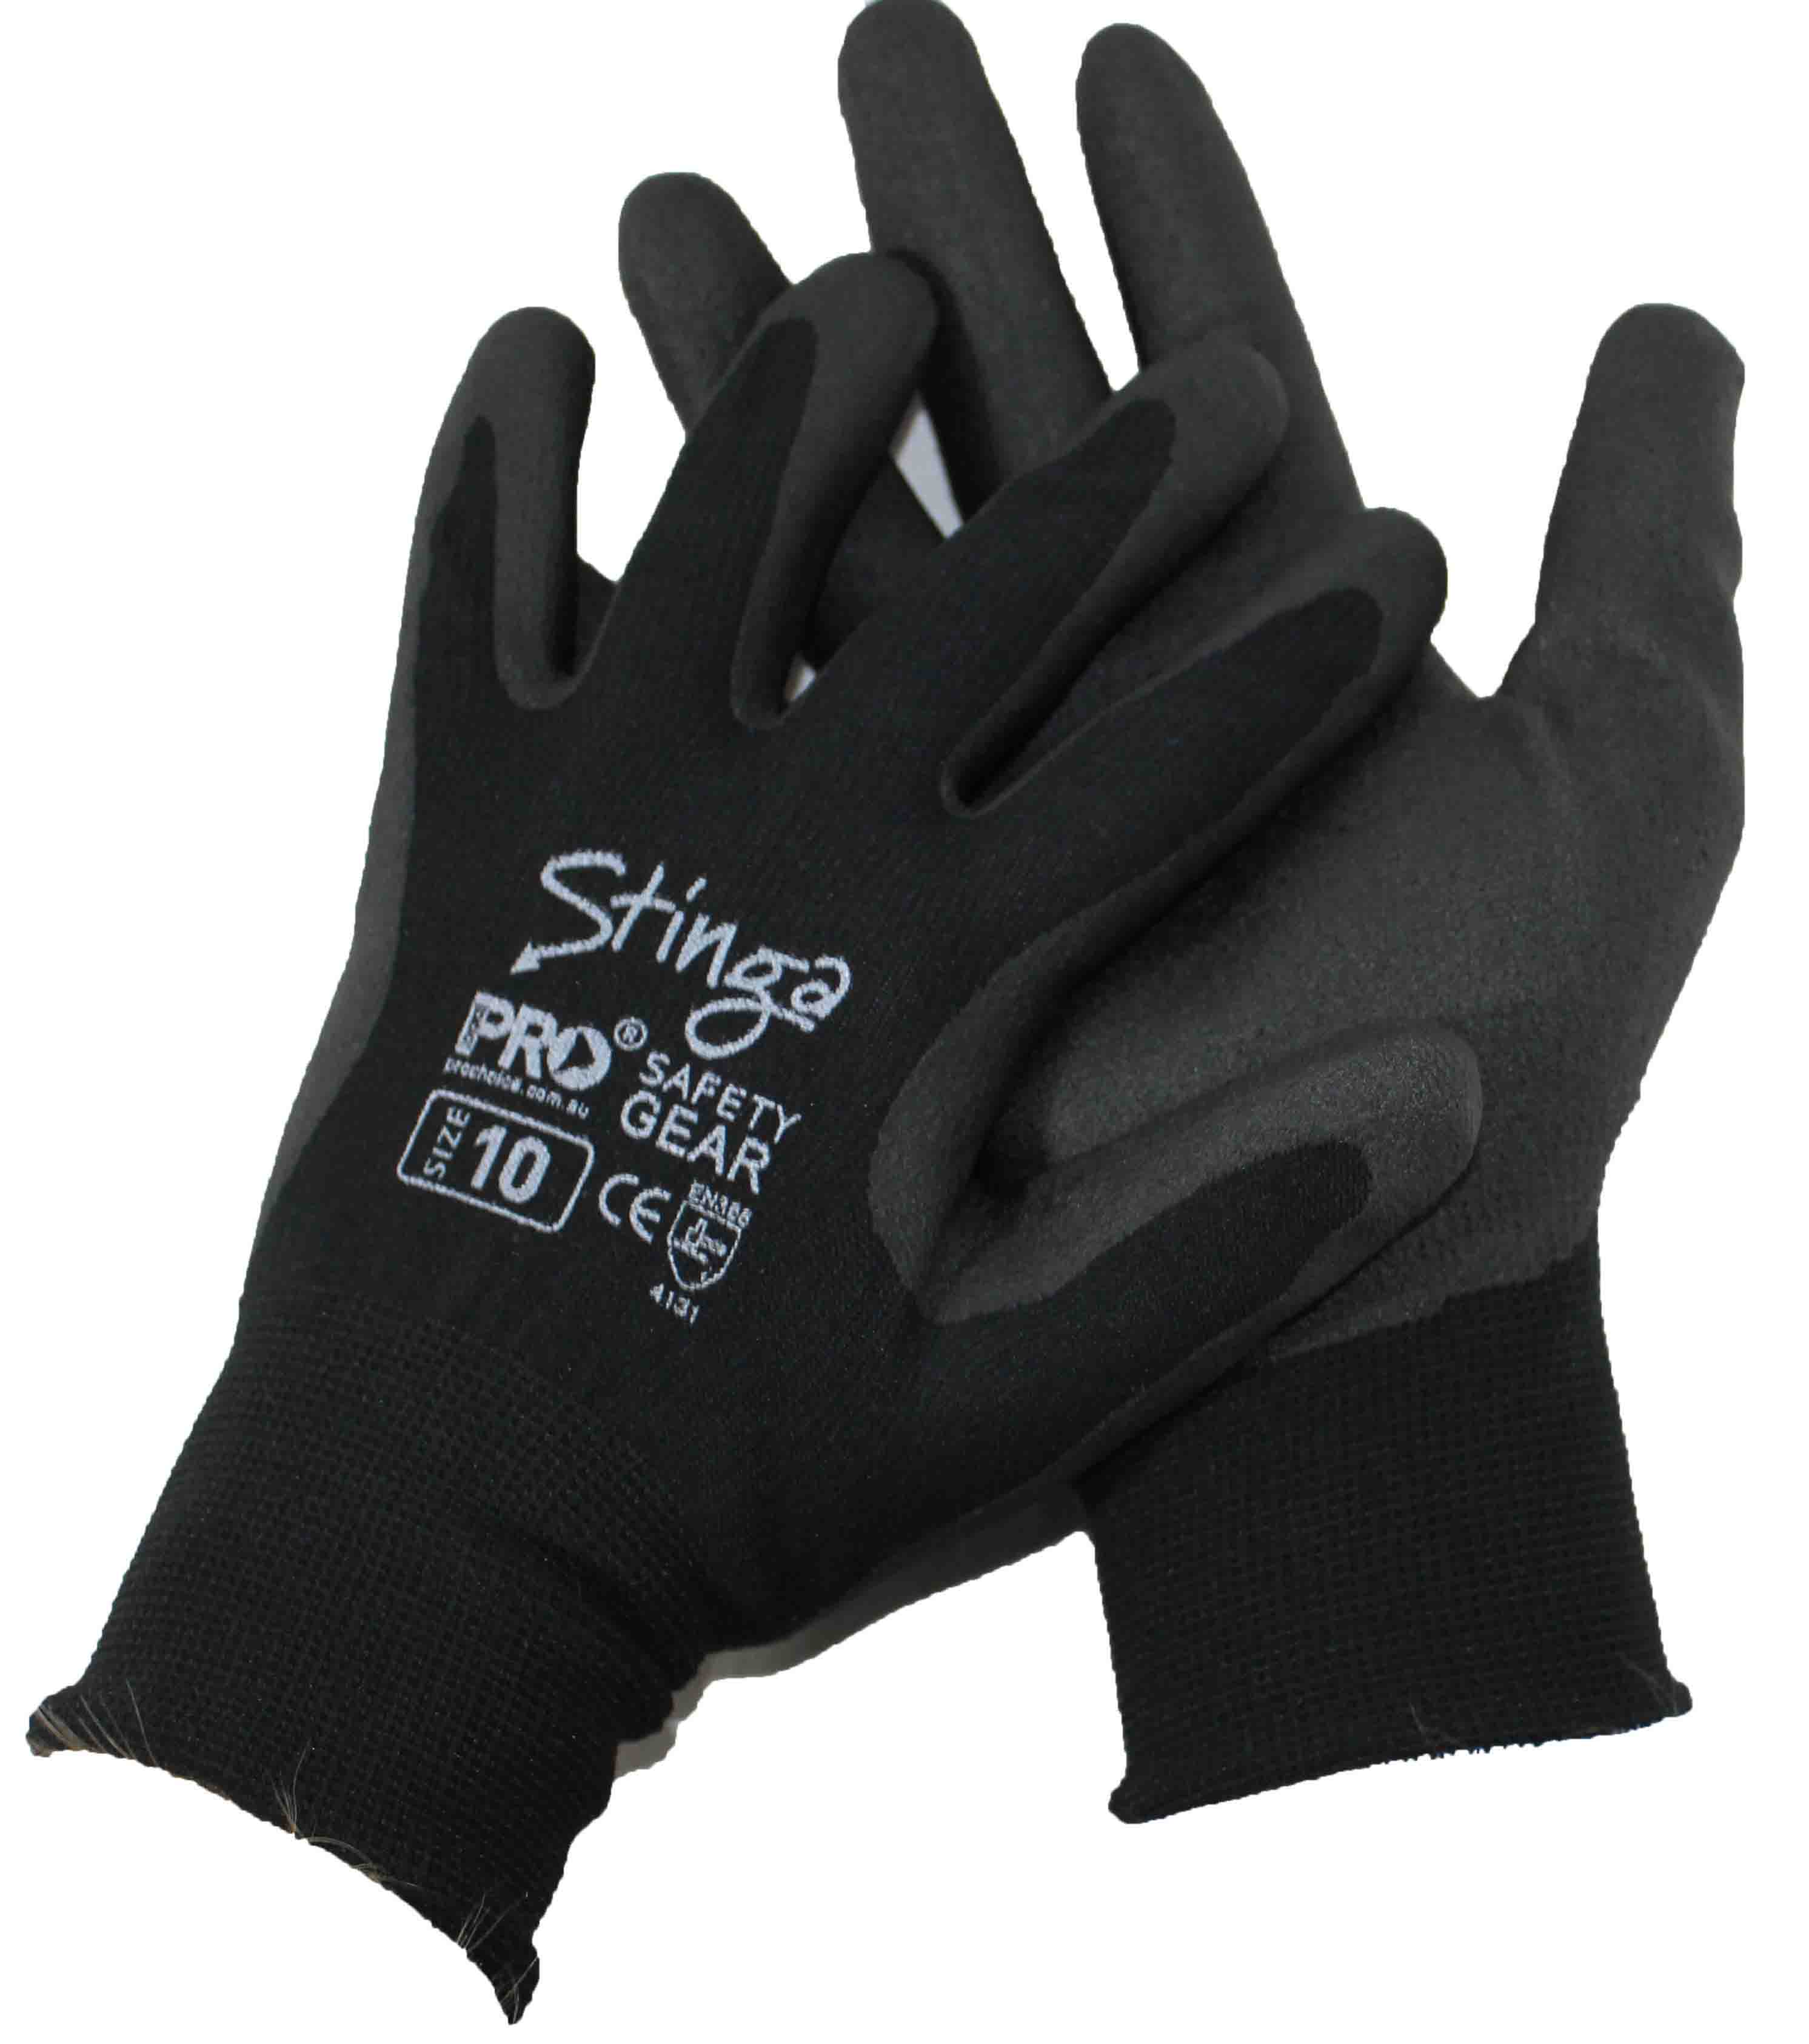 https://info.dynamicsgex.com.au/hubfs/images/New%20Products%20Images/SAFETY%20AND%20PPE/GLVNY%20Glove%20Nylon%20Knit.jpg